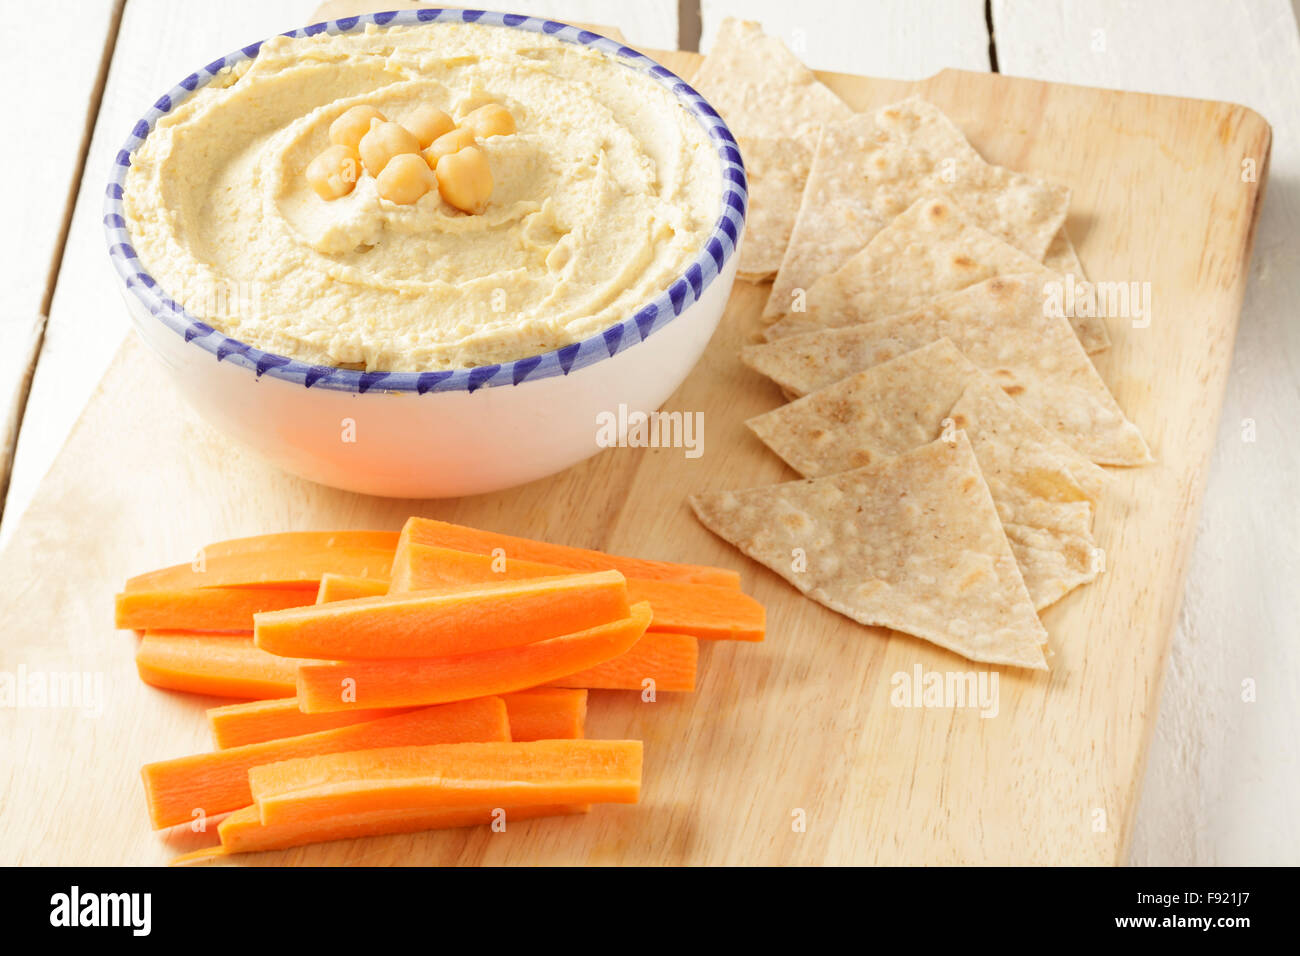 Hummus and carrot sticks with flatbread Stock Photo